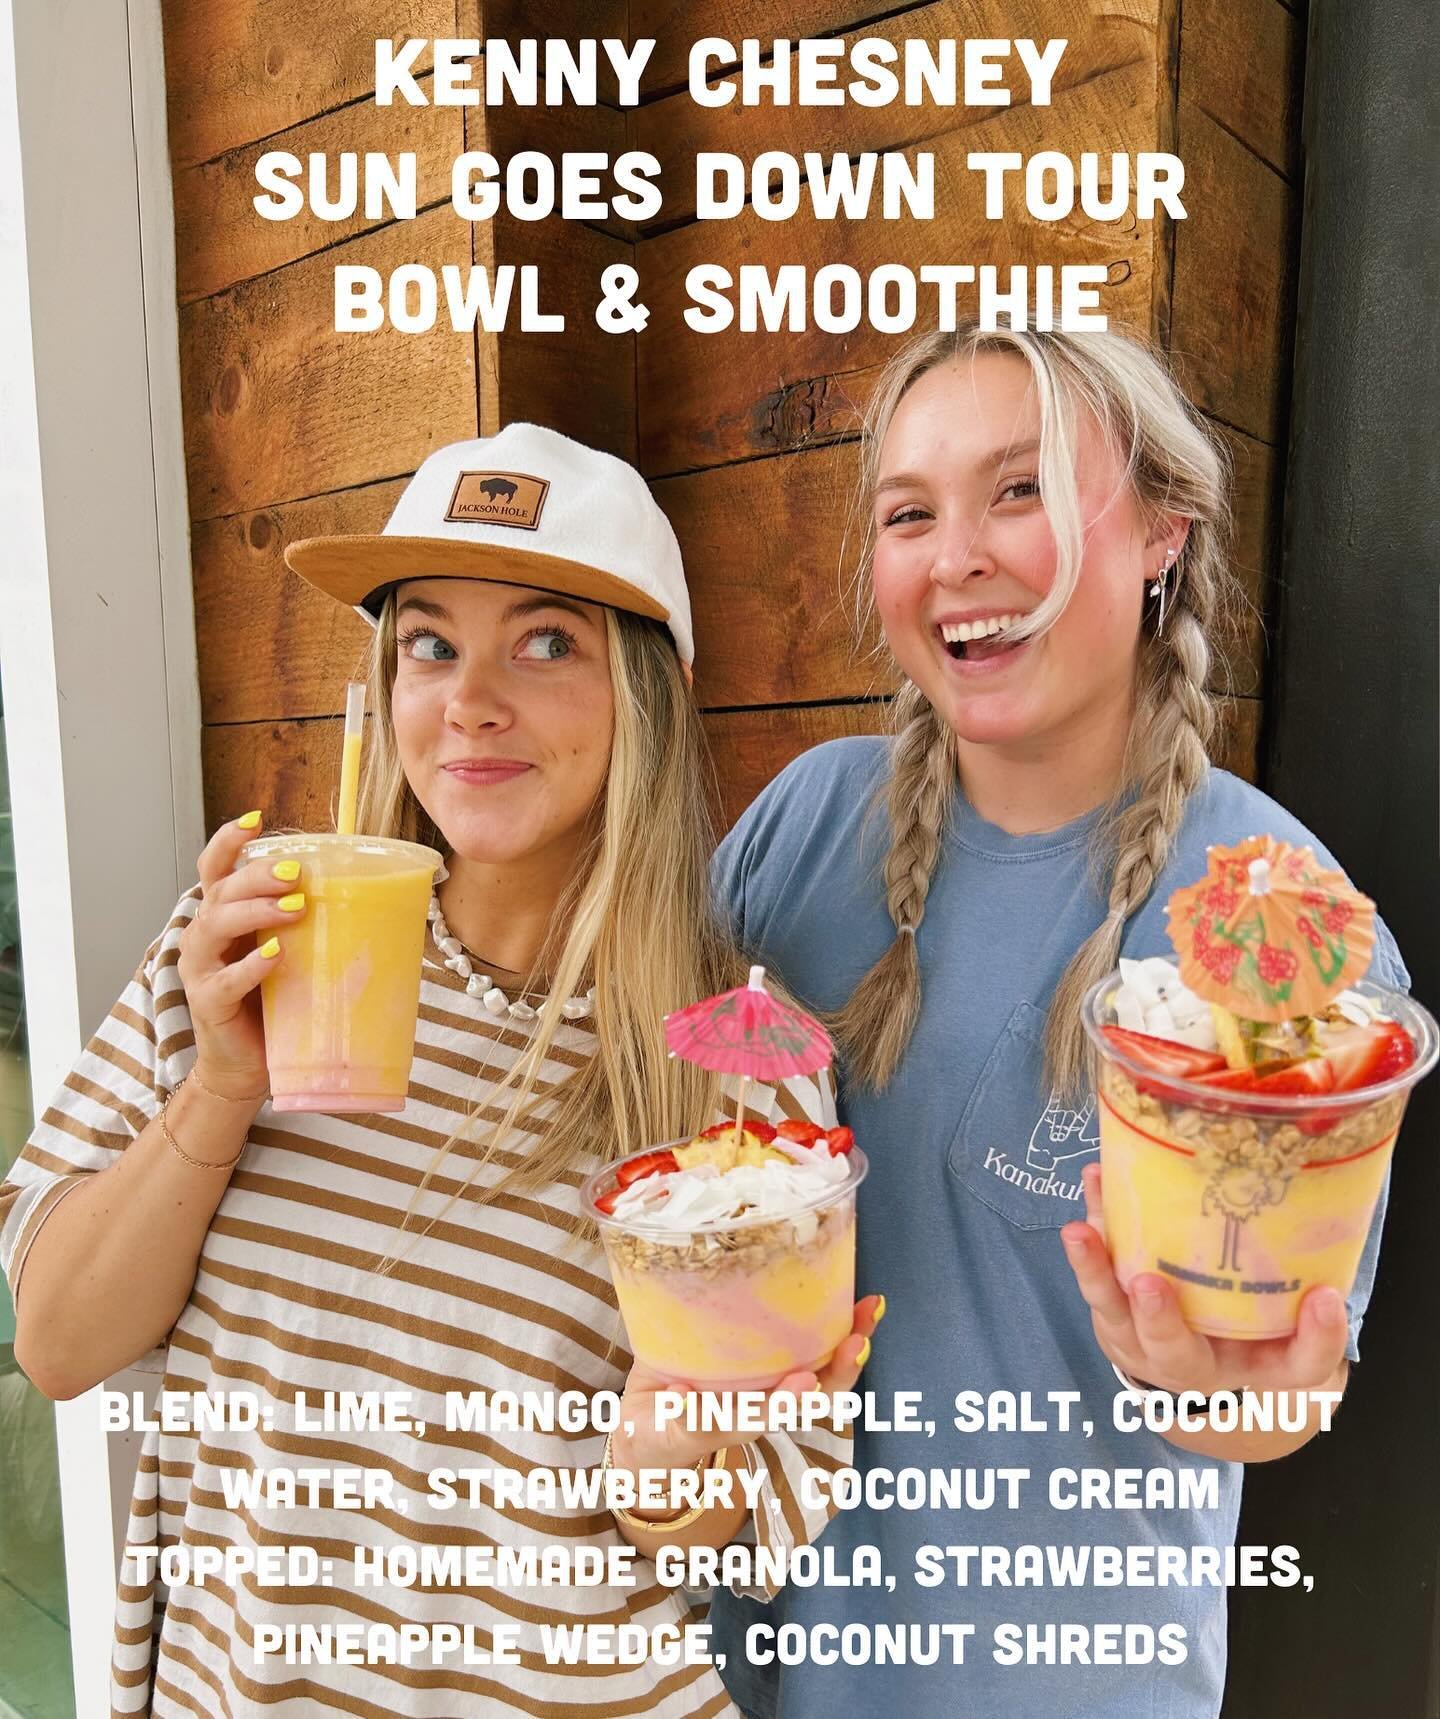 teaming up with @kennychesney &amp; the official #sungoesdowntour from TODAY May 3 - May 11 !!!!!!

we are giving away TEN tickets to the AT&amp;T stadium show in Arlington and celebrating the tour with a limited edition bowl and smoothie in the fort